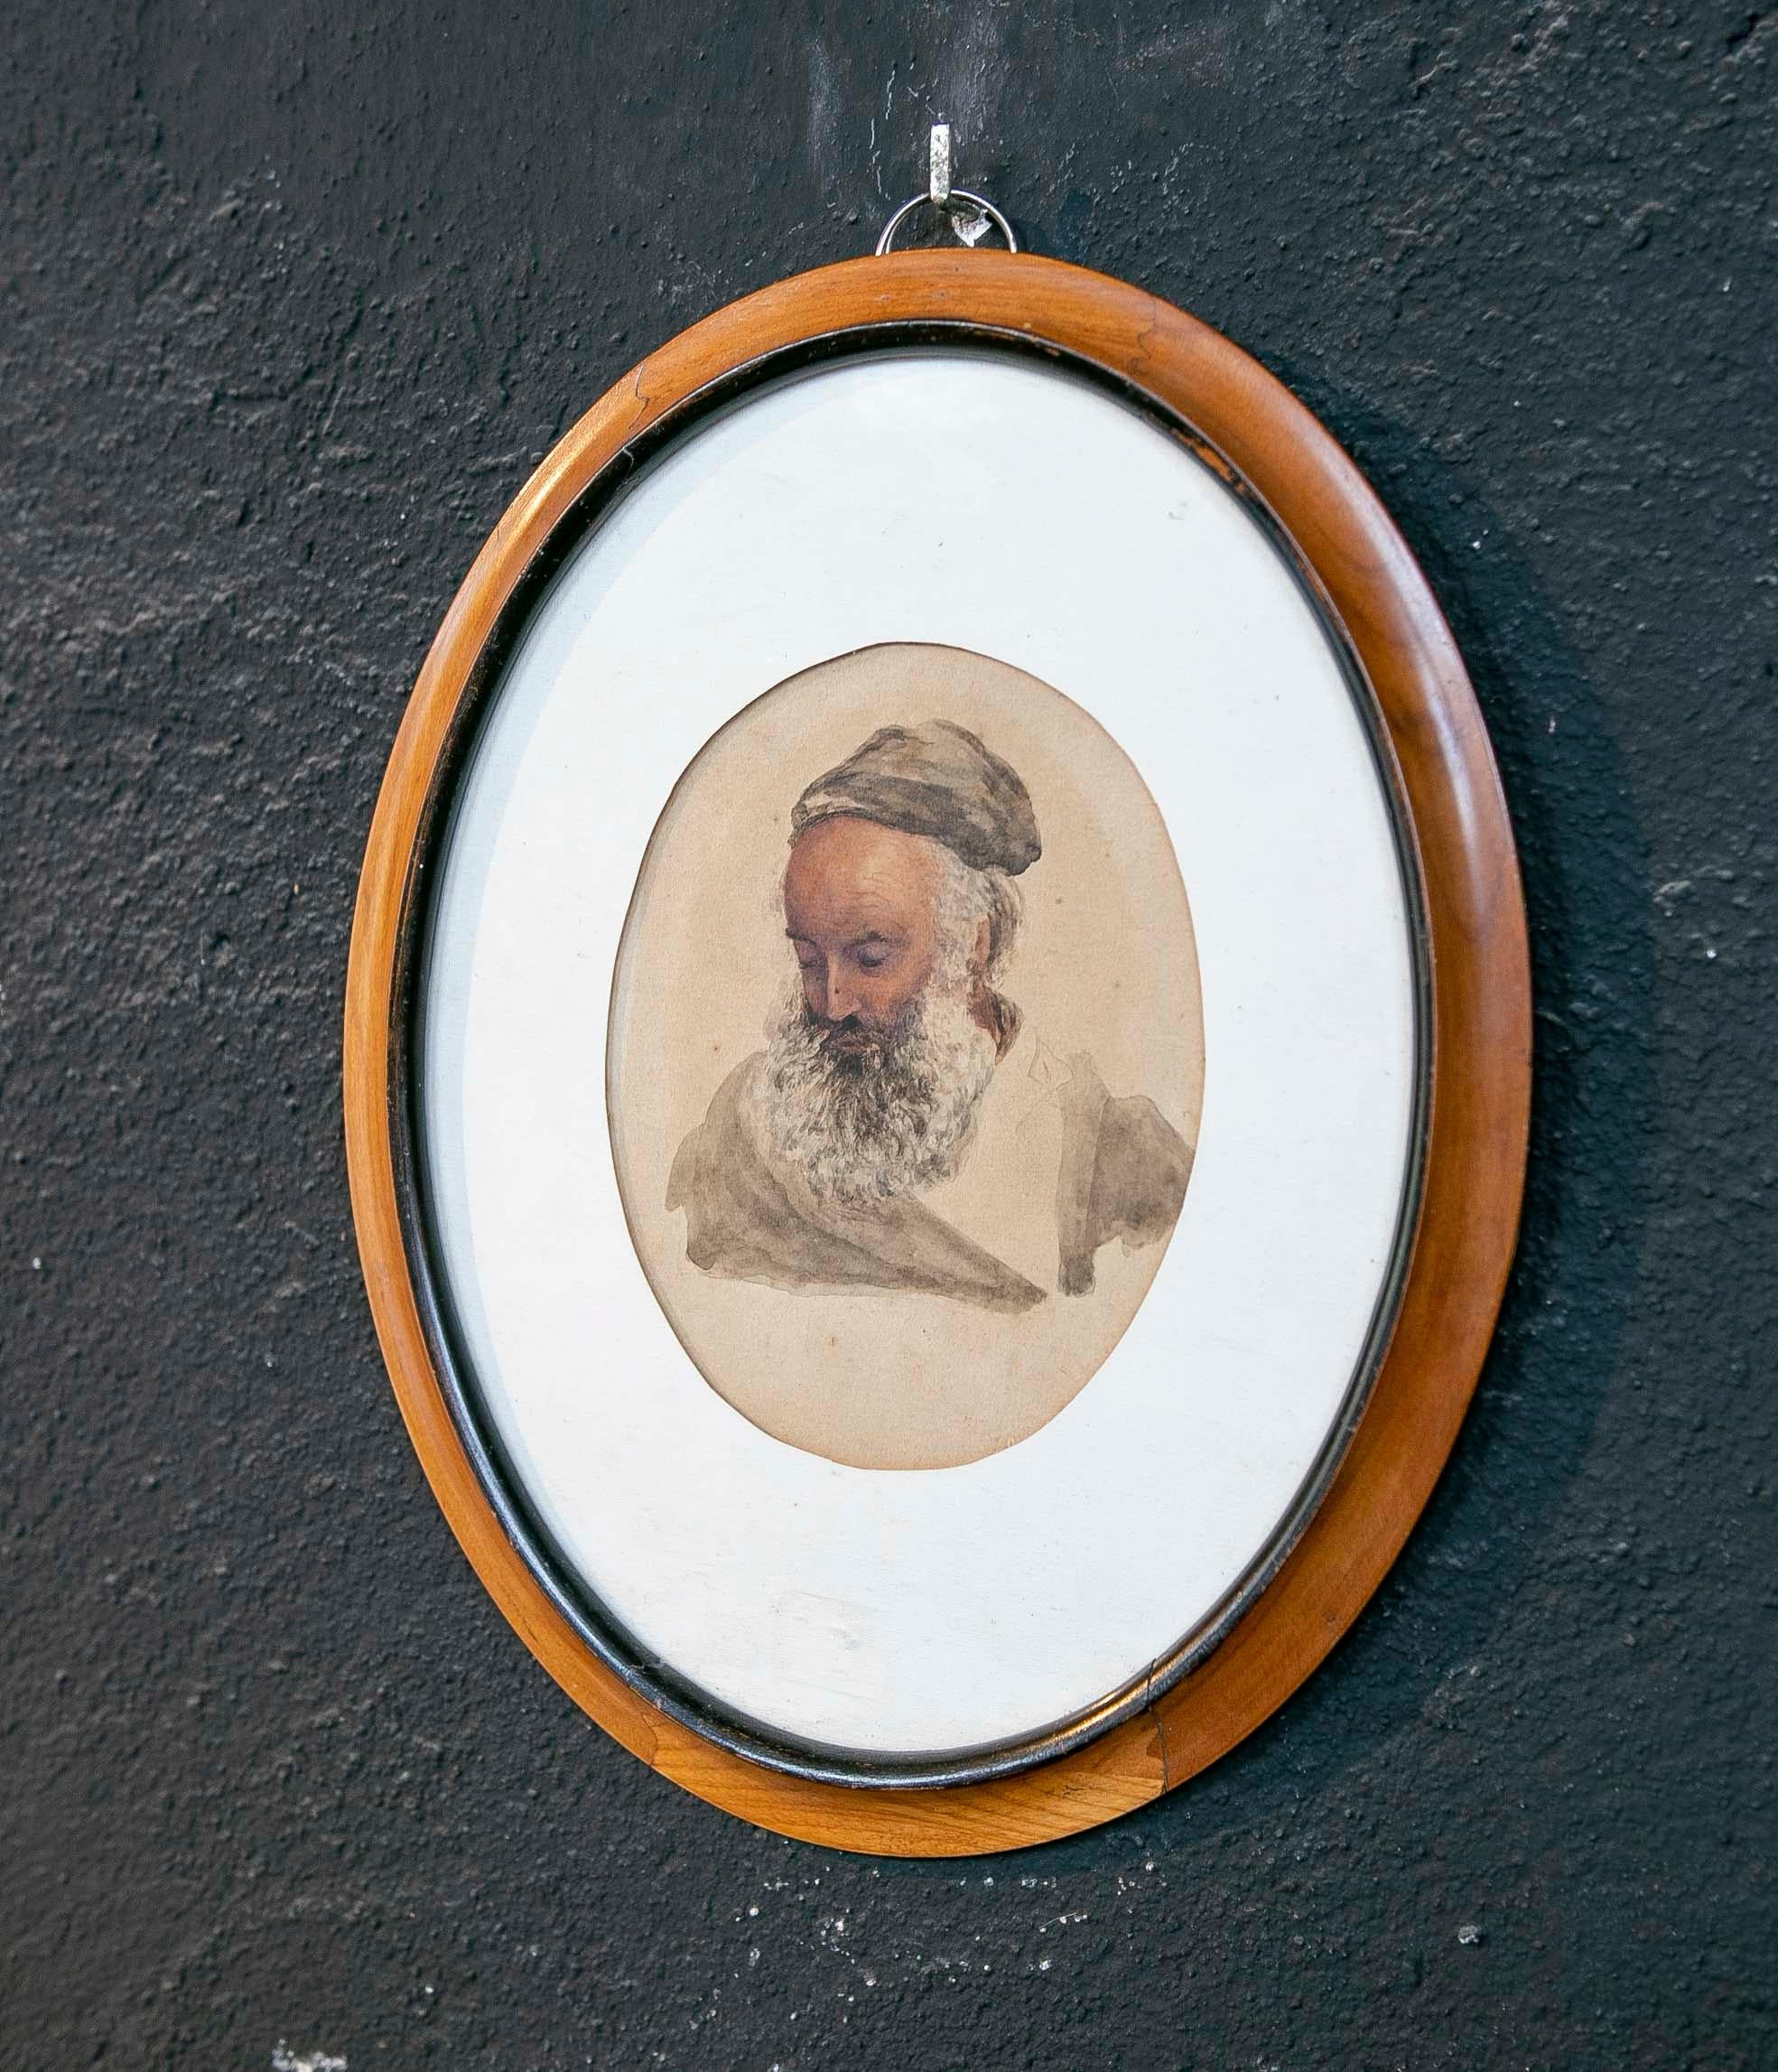 19th century Orientalist Framed Portrait Painting of an Arabic Character
Measurements with frame: 29x23x2cm.